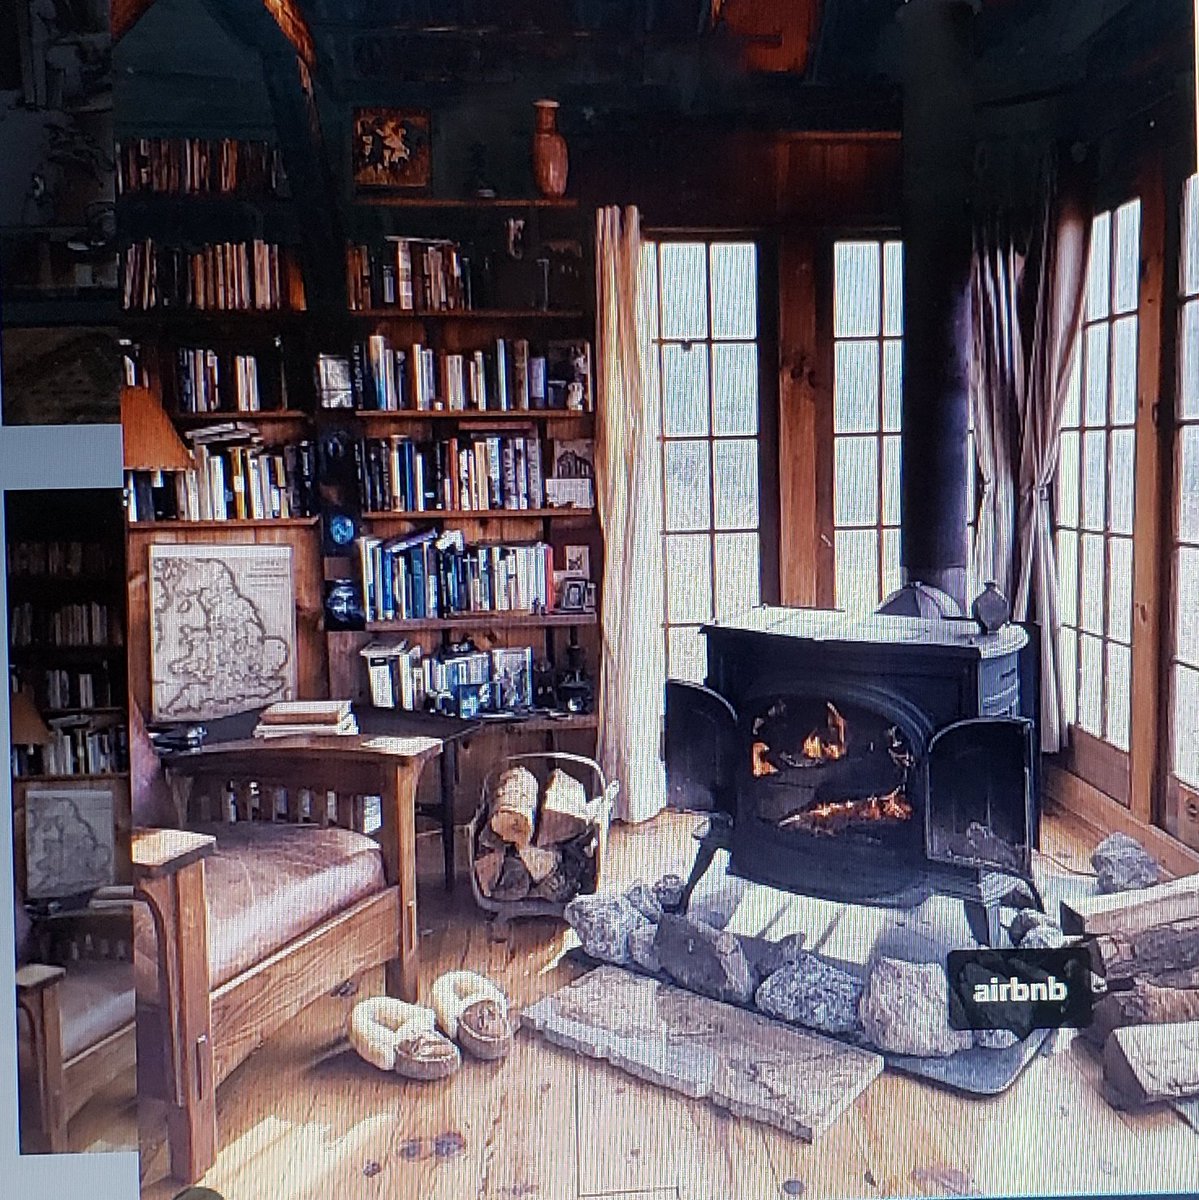 Love this pic @Forestbound. Makes me want to curl up and read.
#amwriting 
#WritingCommunity 
#writerslife 
#romance 
#romanceisin 
#AmWriting 
#writers 
#romaceauthor
#Author 
#authorsofinstagram